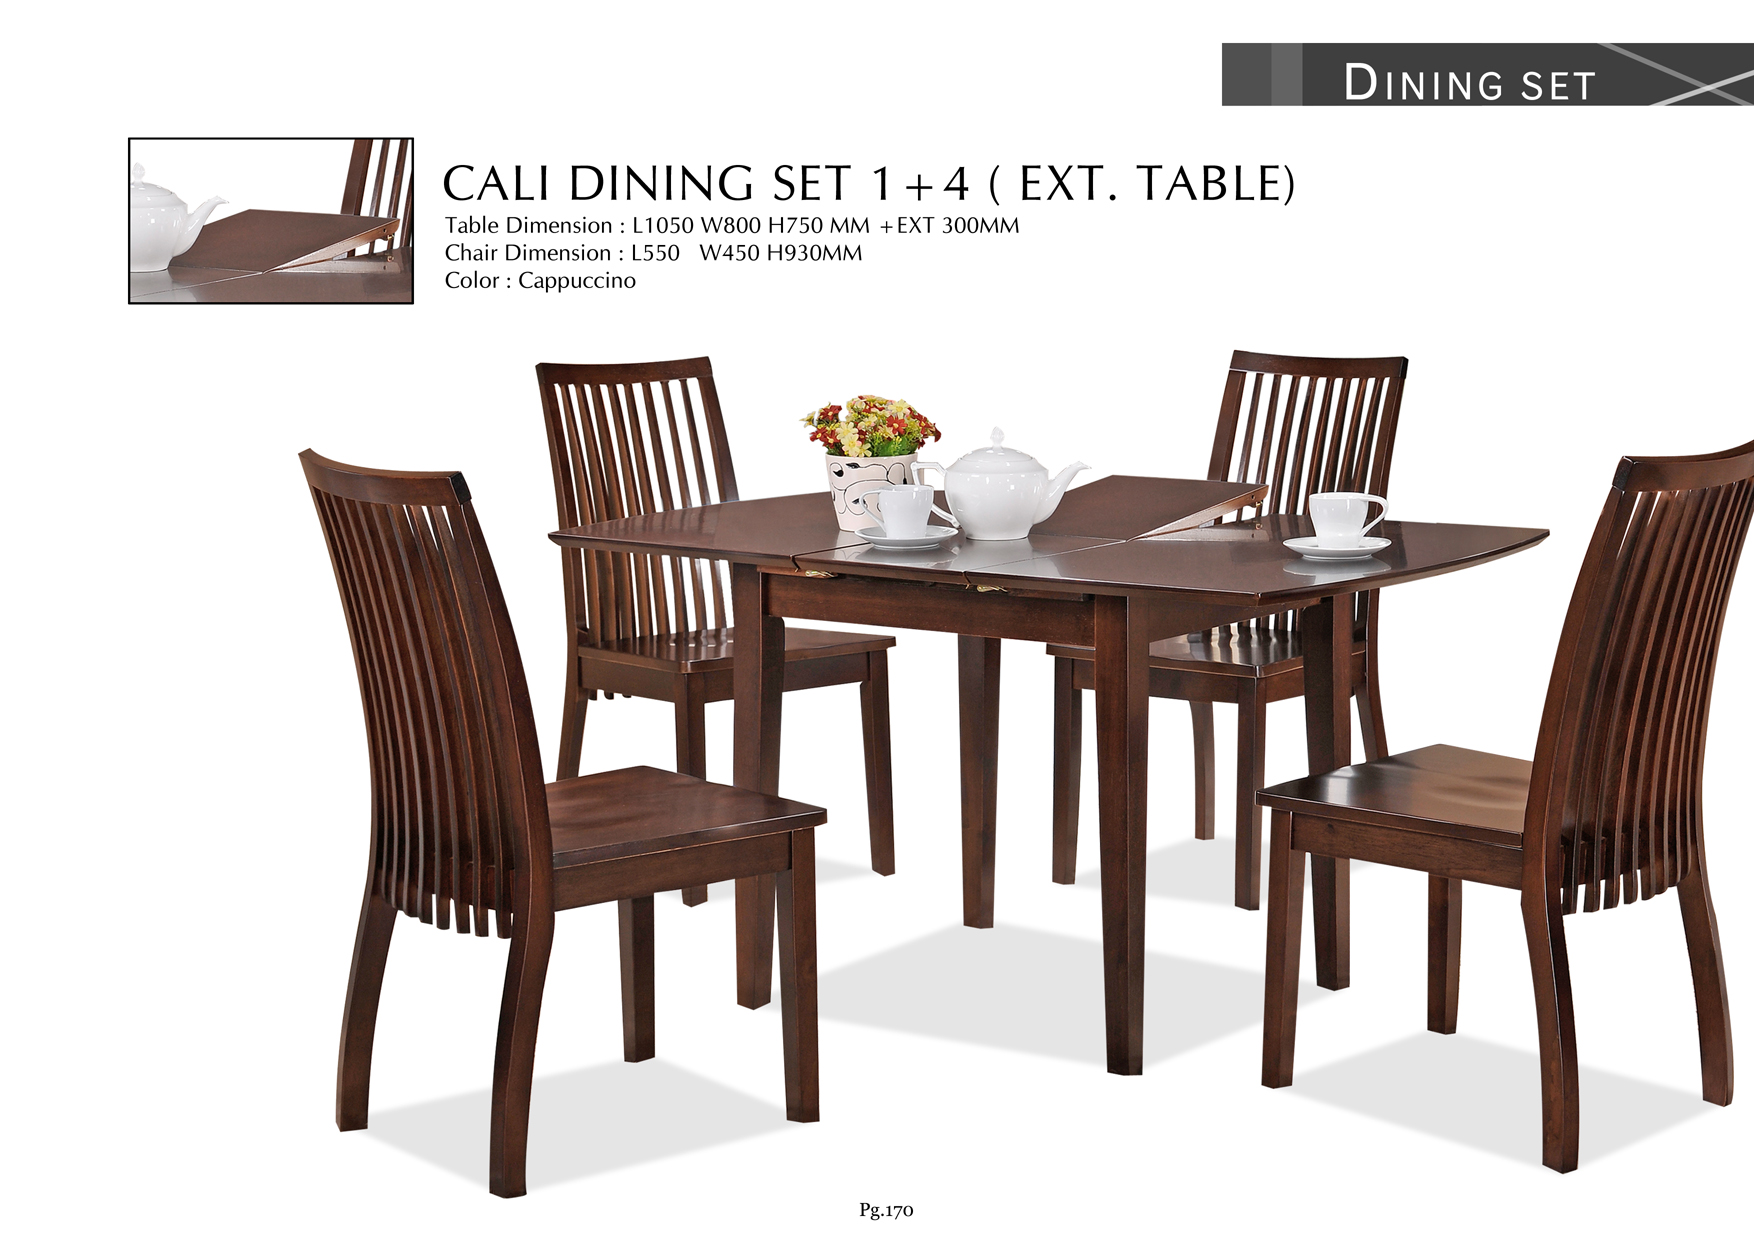 Product: PG170. CALI DINING SET (1+4) EXT TABLE